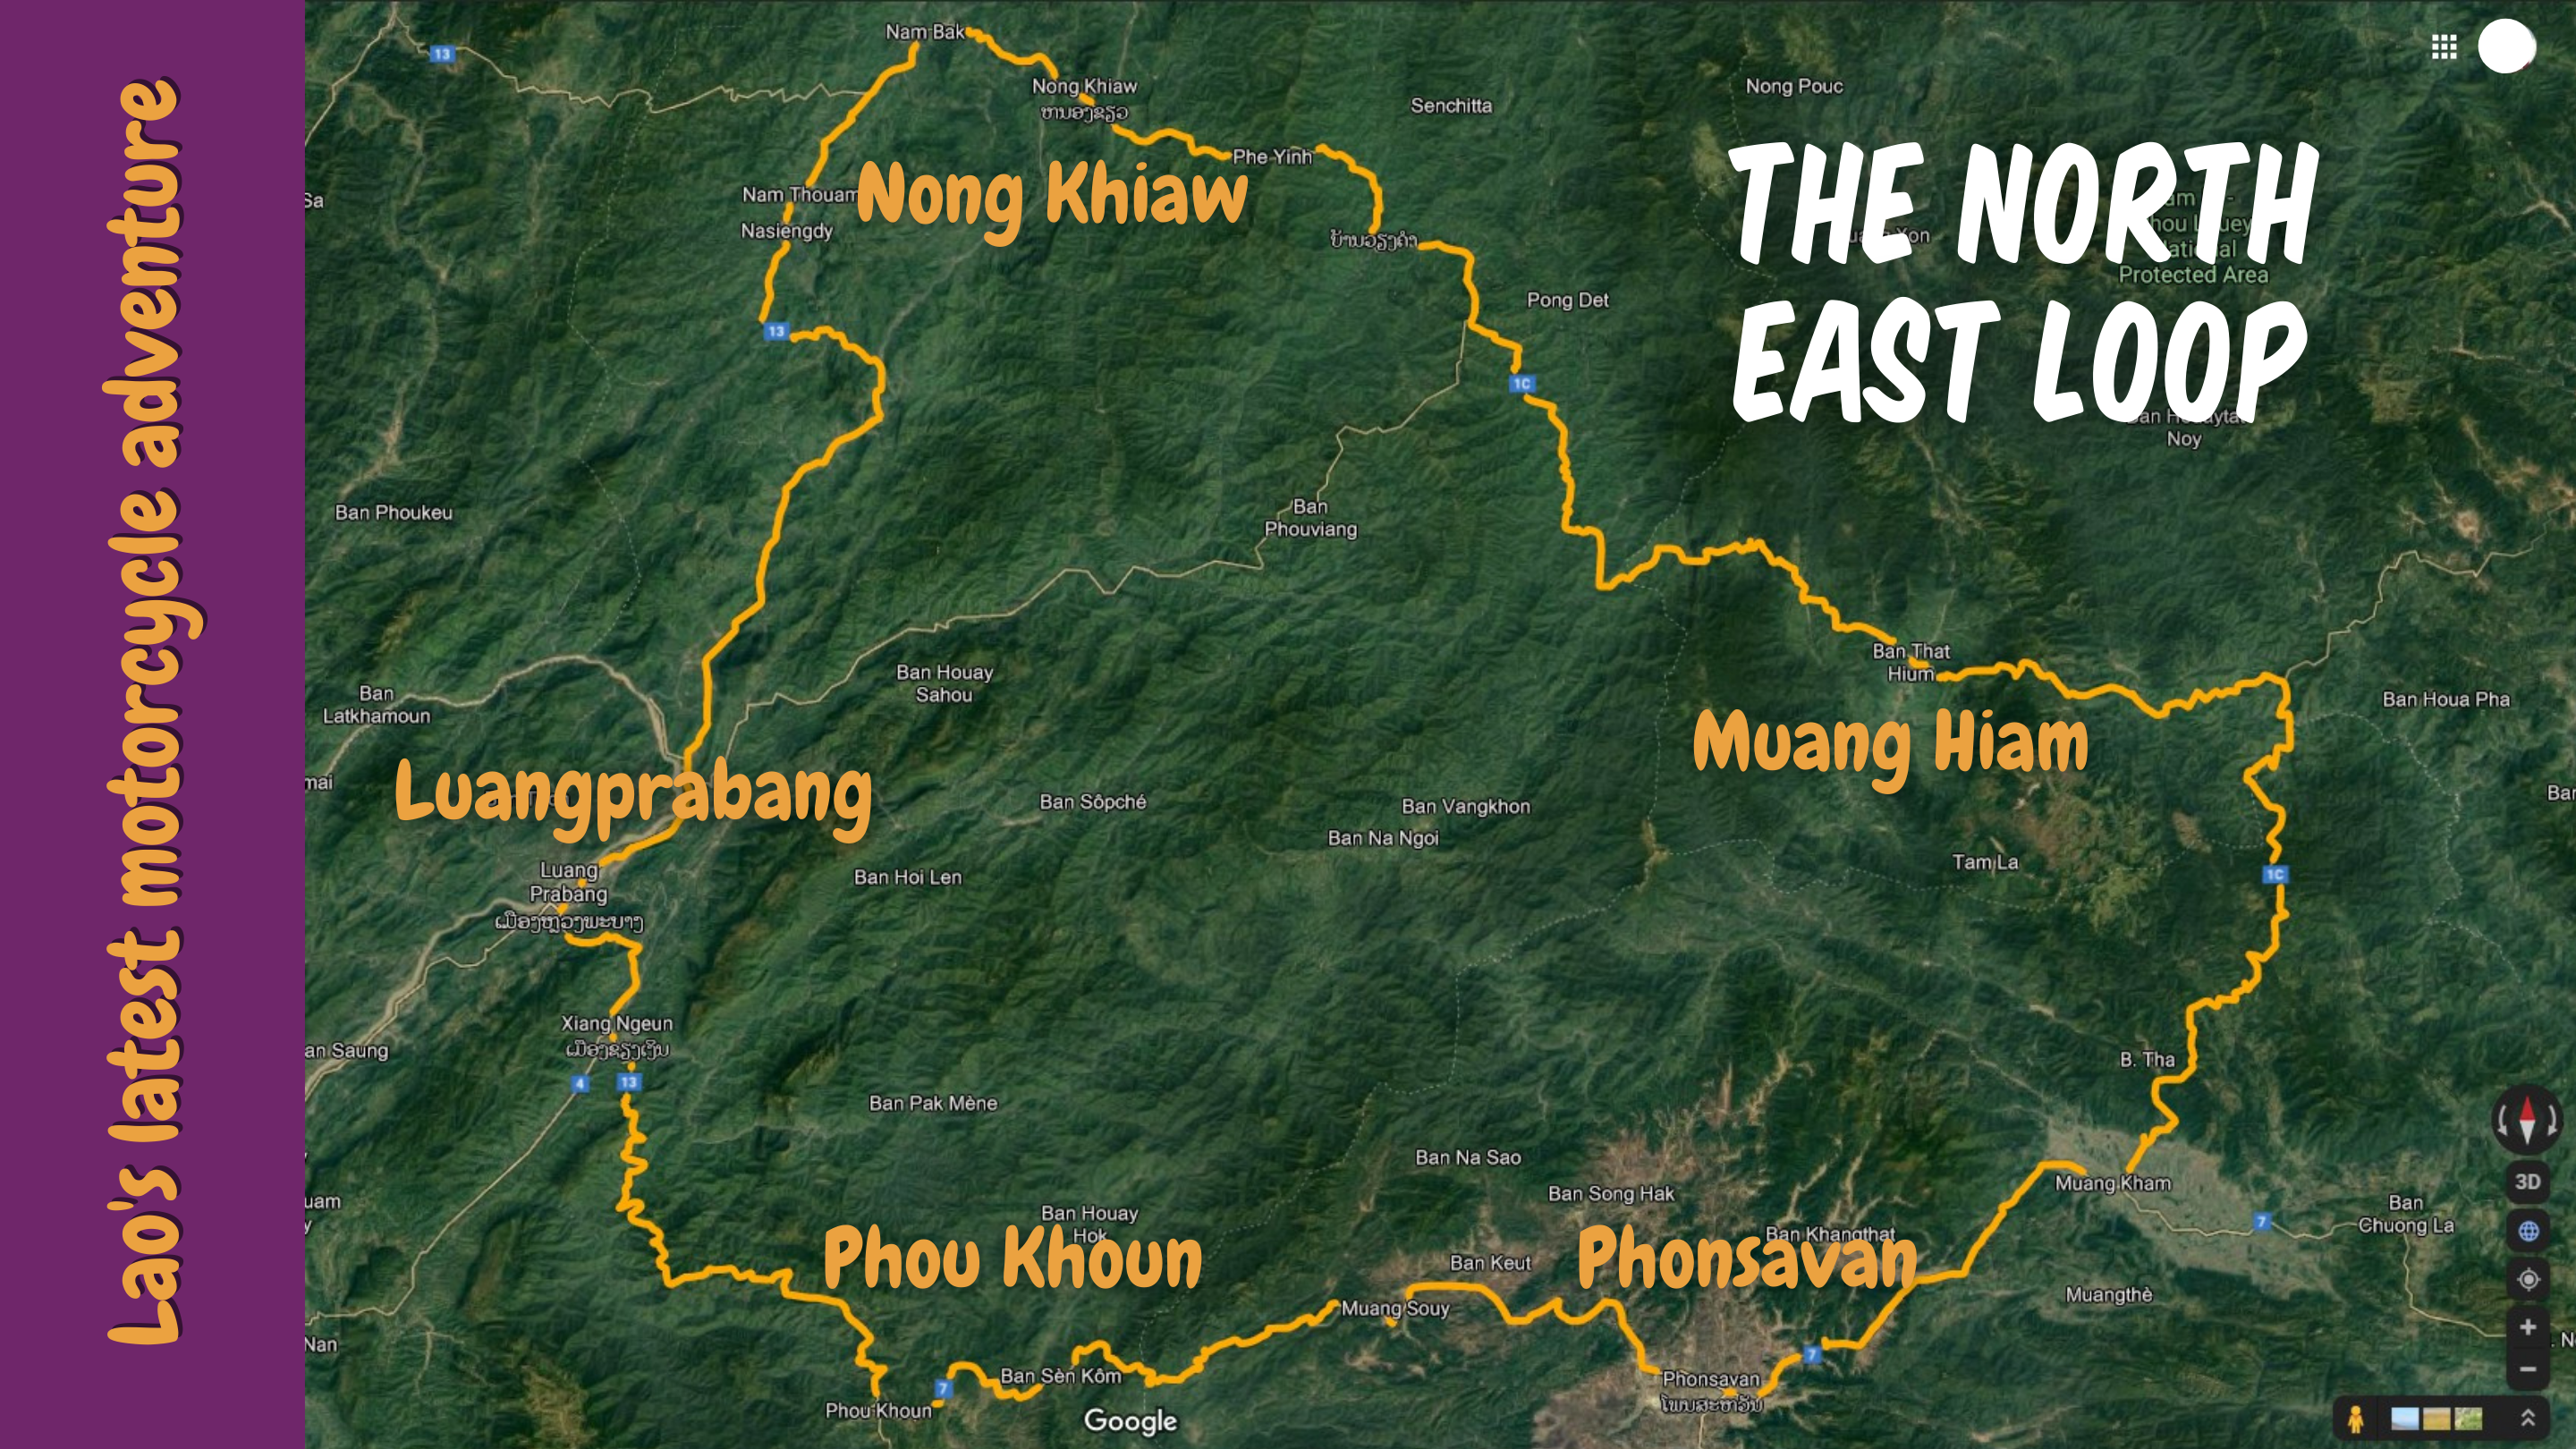 The North East Loop - Lao's latest motorcycle adventure